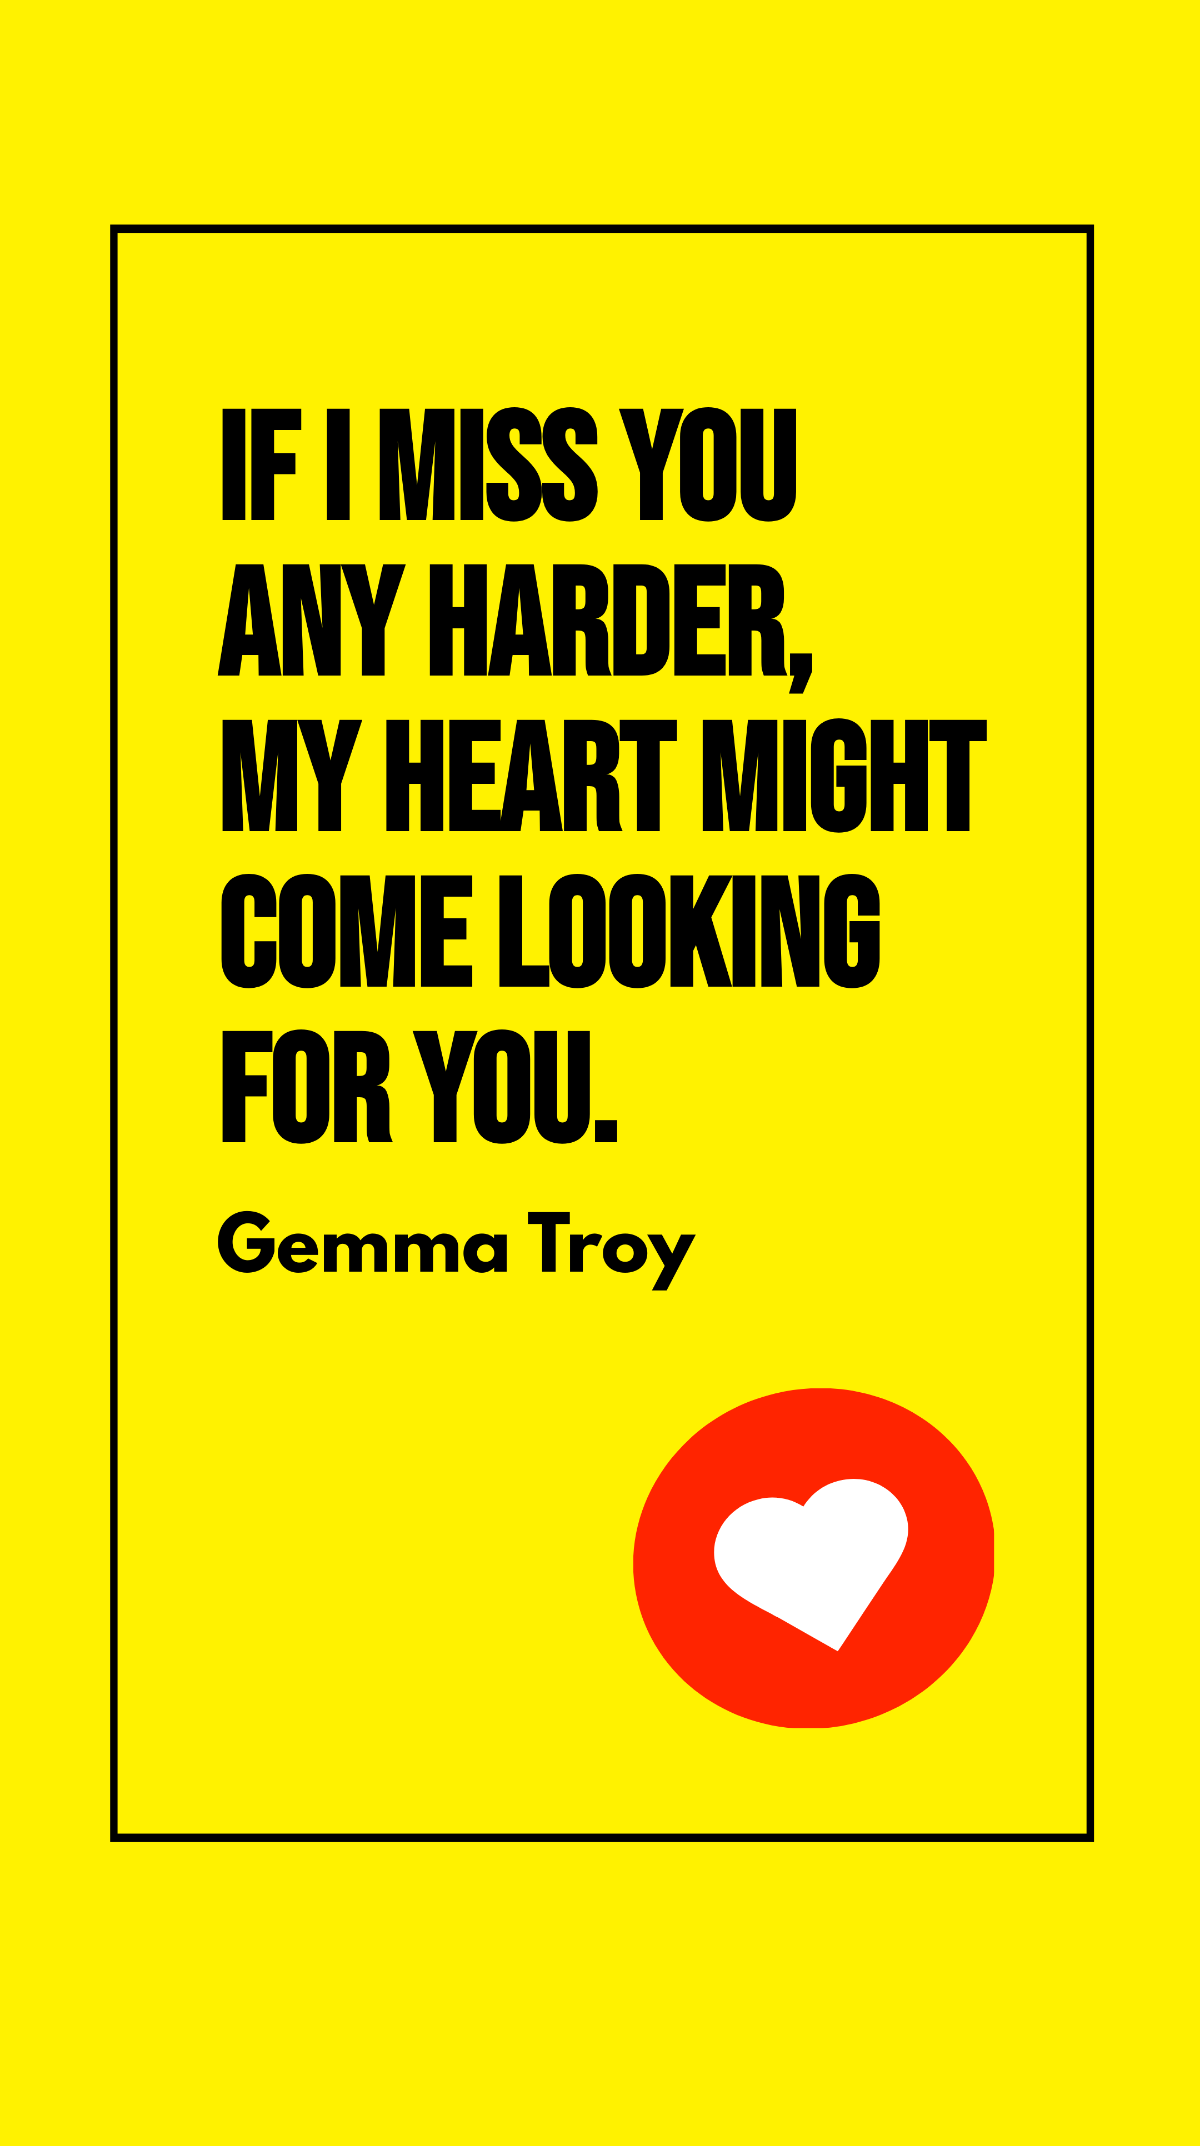 Gemma Troy - If I miss you any harder, my heart might come looking for you. Template